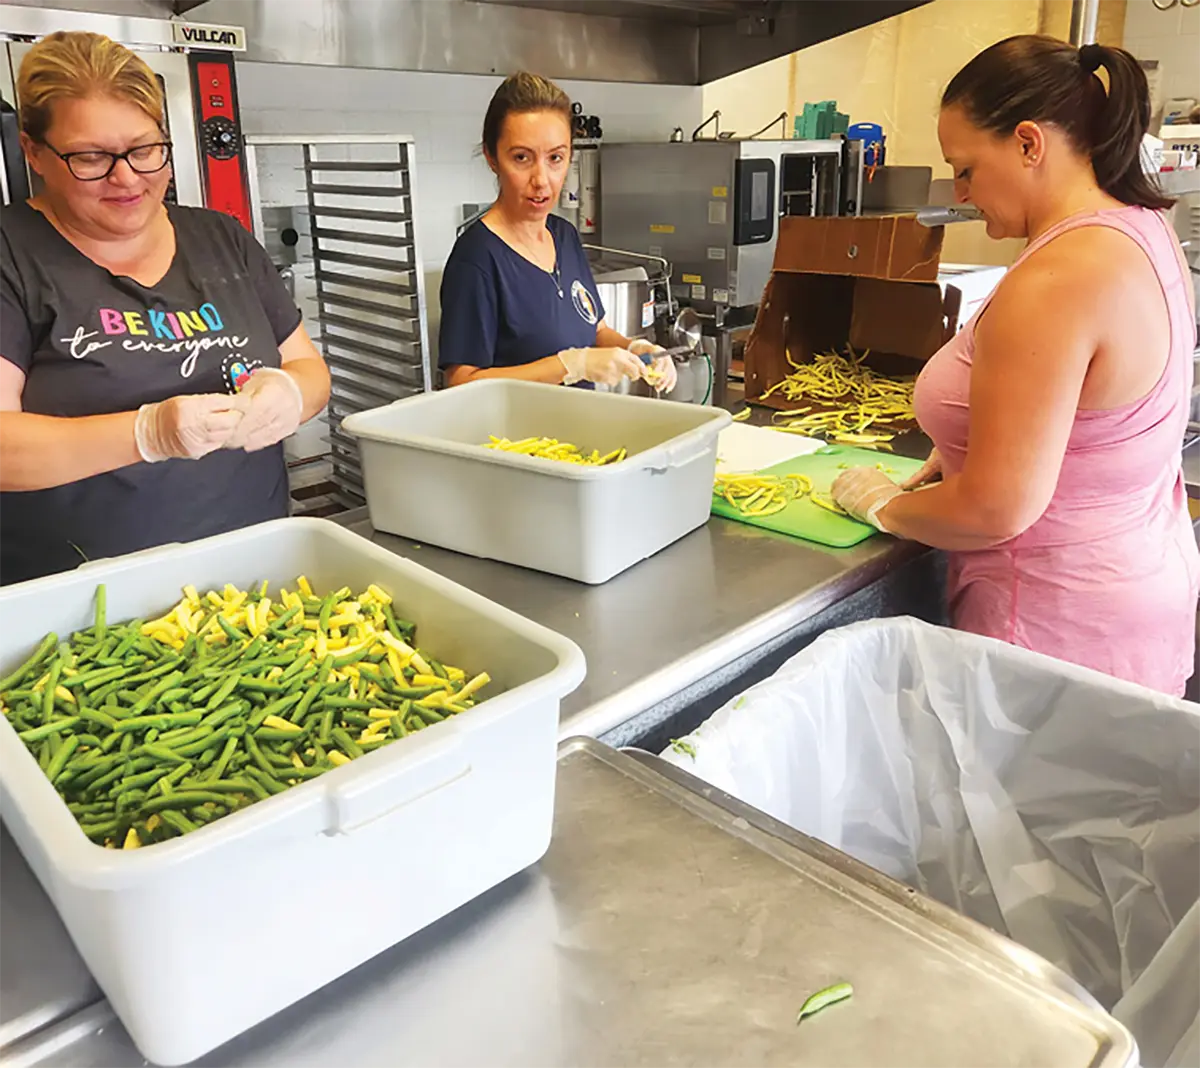 Attica Central School District team members, from left, Melissa Brooks, Amanda Brown and Jenelle Bauer help break down and preserve produce from local farms for school meals. The team prepped green beans, corn, berries and more. 